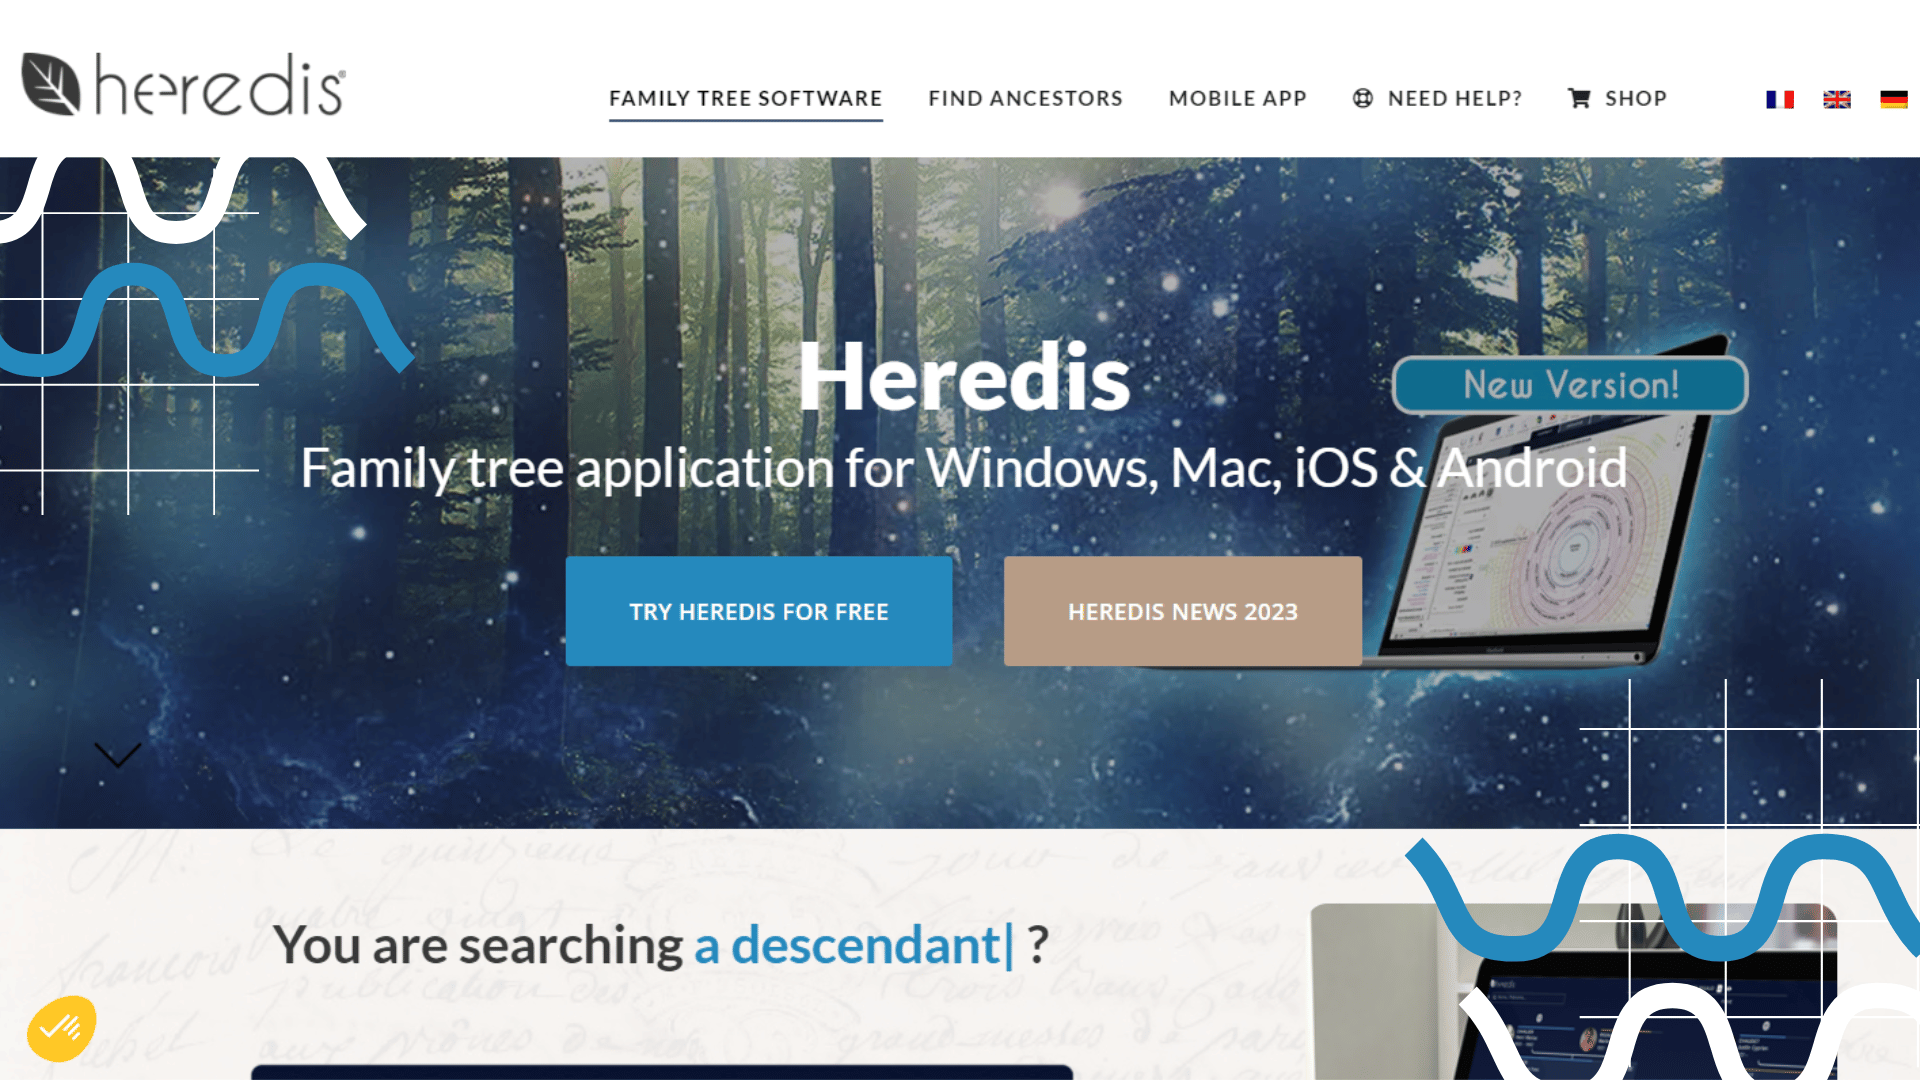 Heredis Features